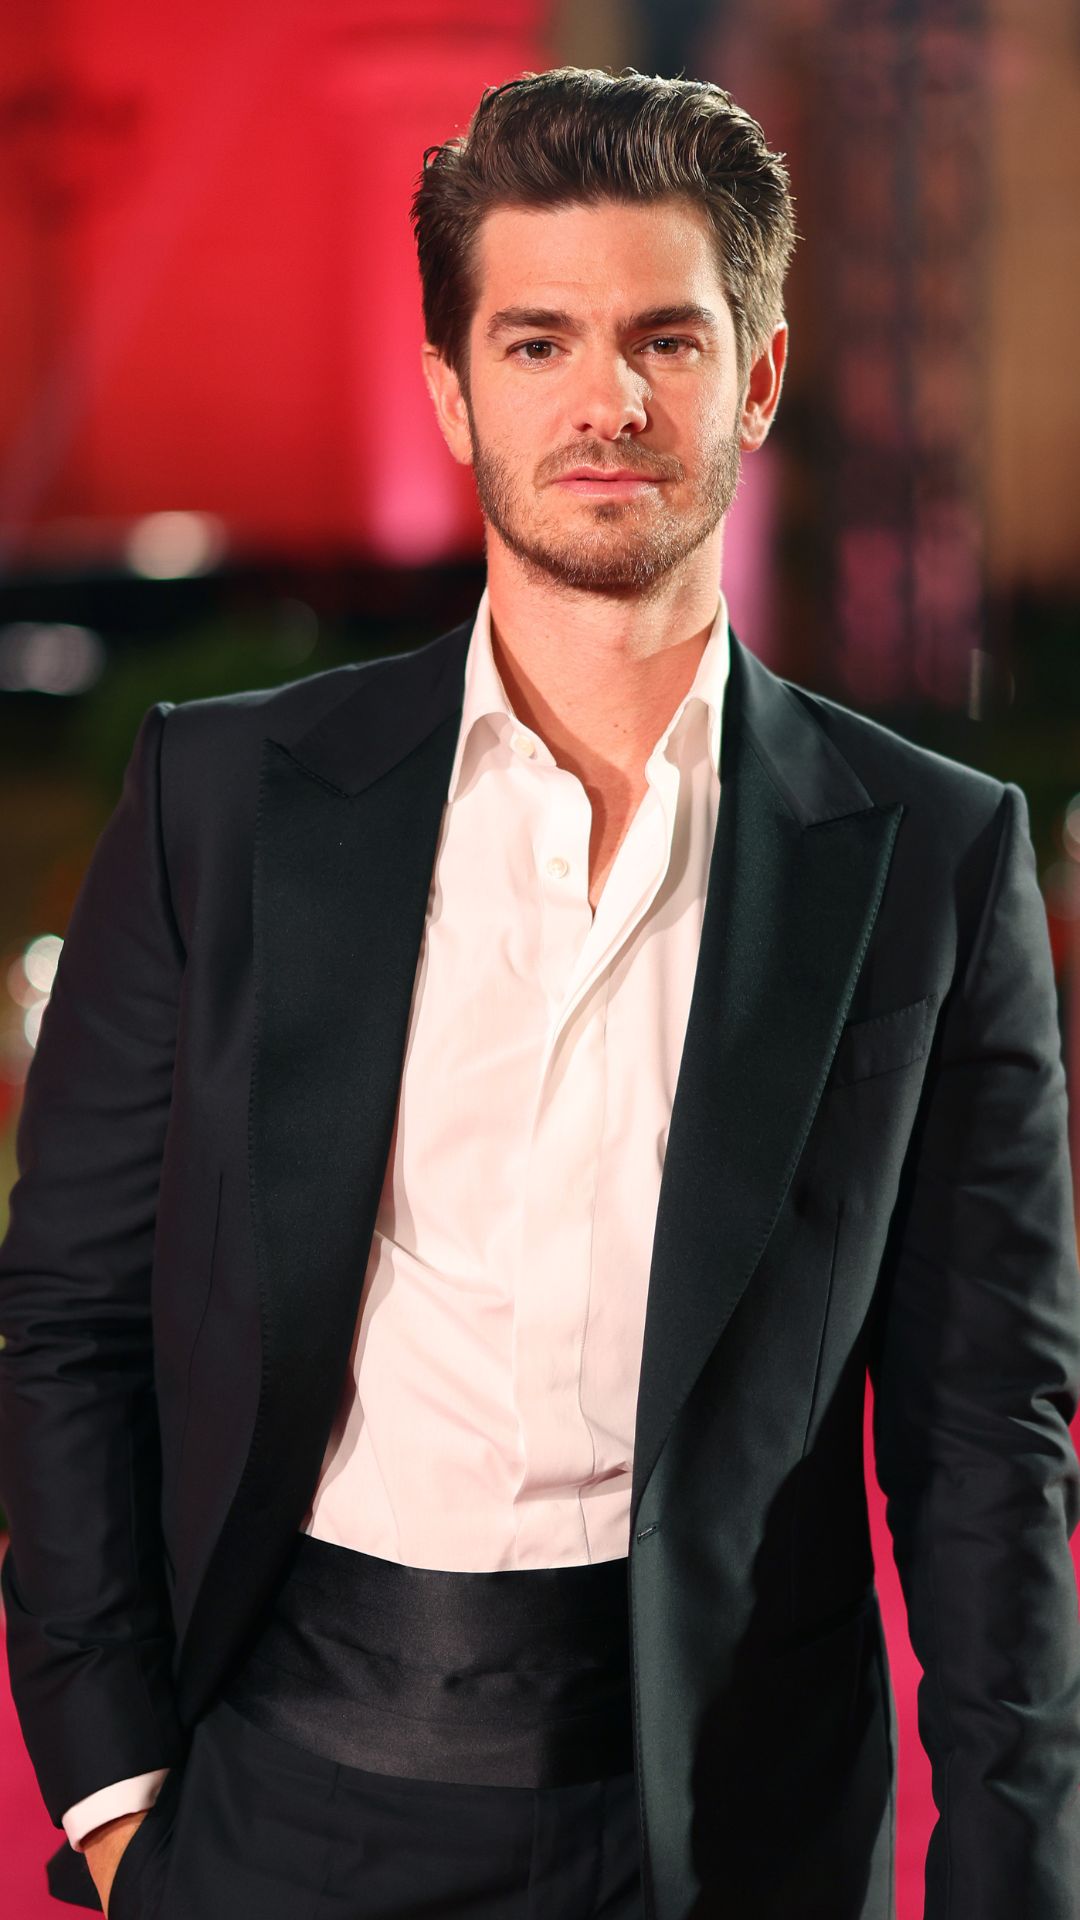 Andrew Garfield wears a black suit and white shirt